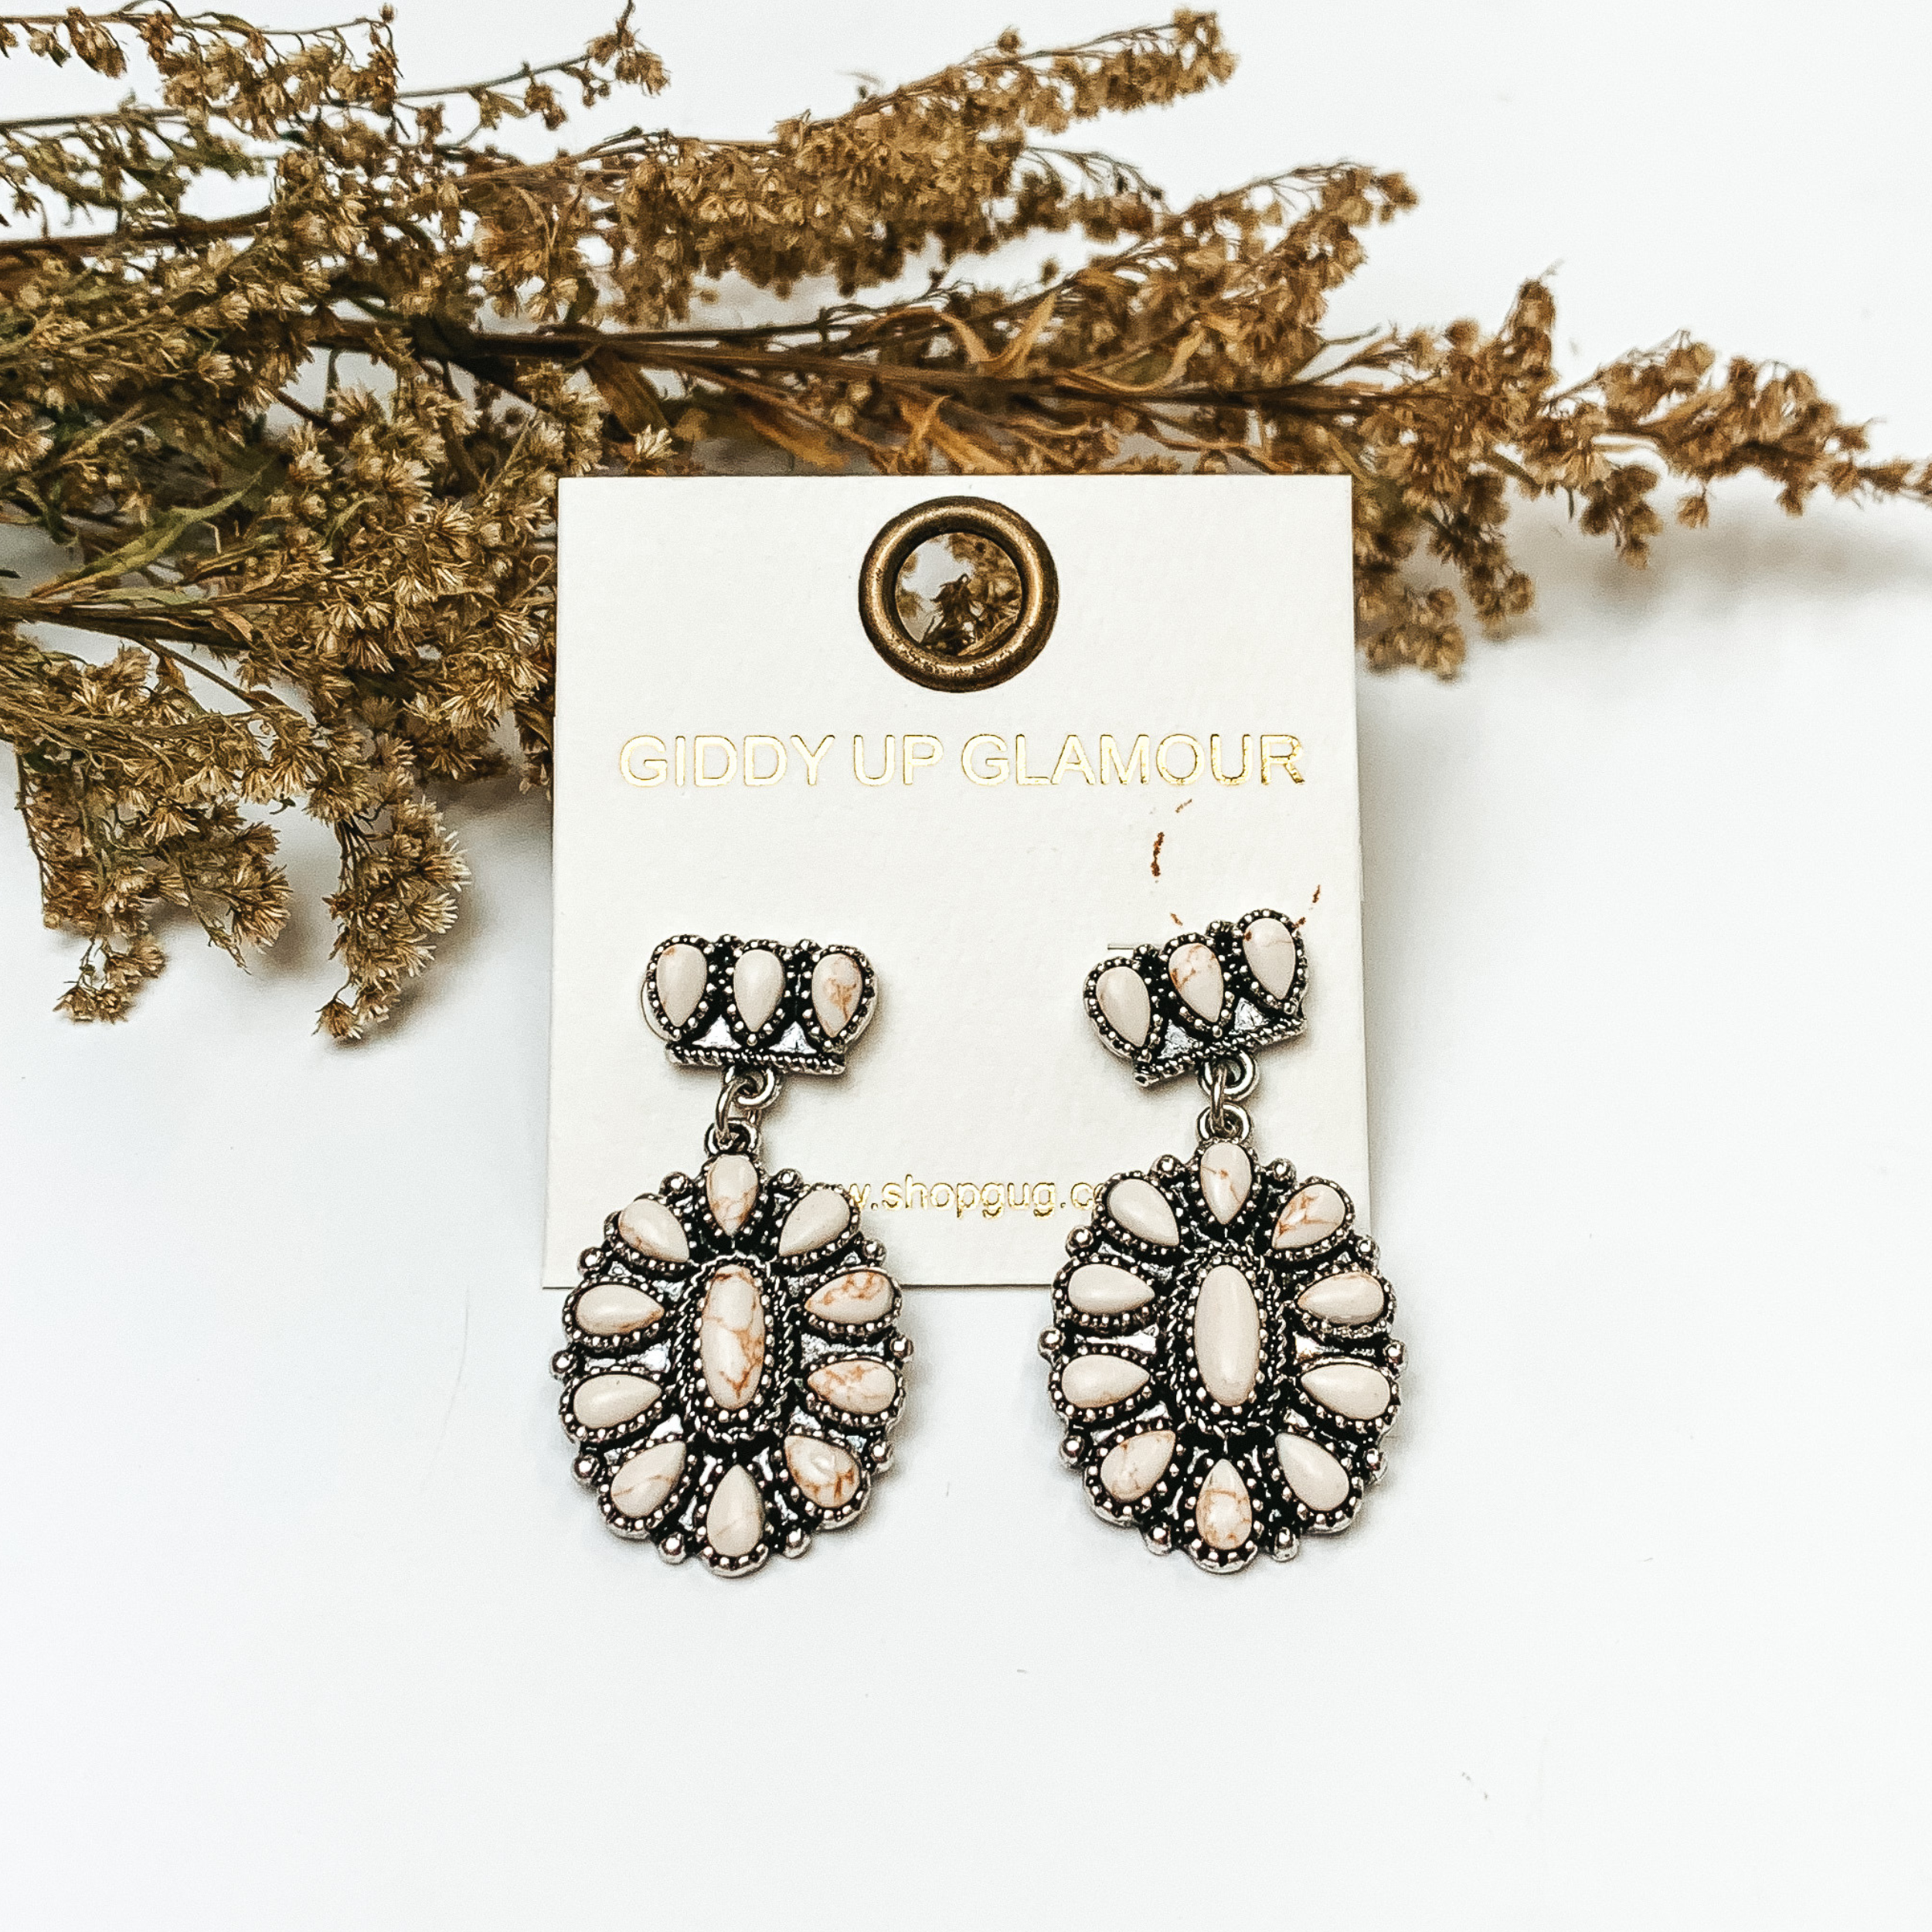 Silver tone cluster post earrings with oval cluster drop with ivory stones. These earrings are pictured on a white background with greenery behind the earrings.